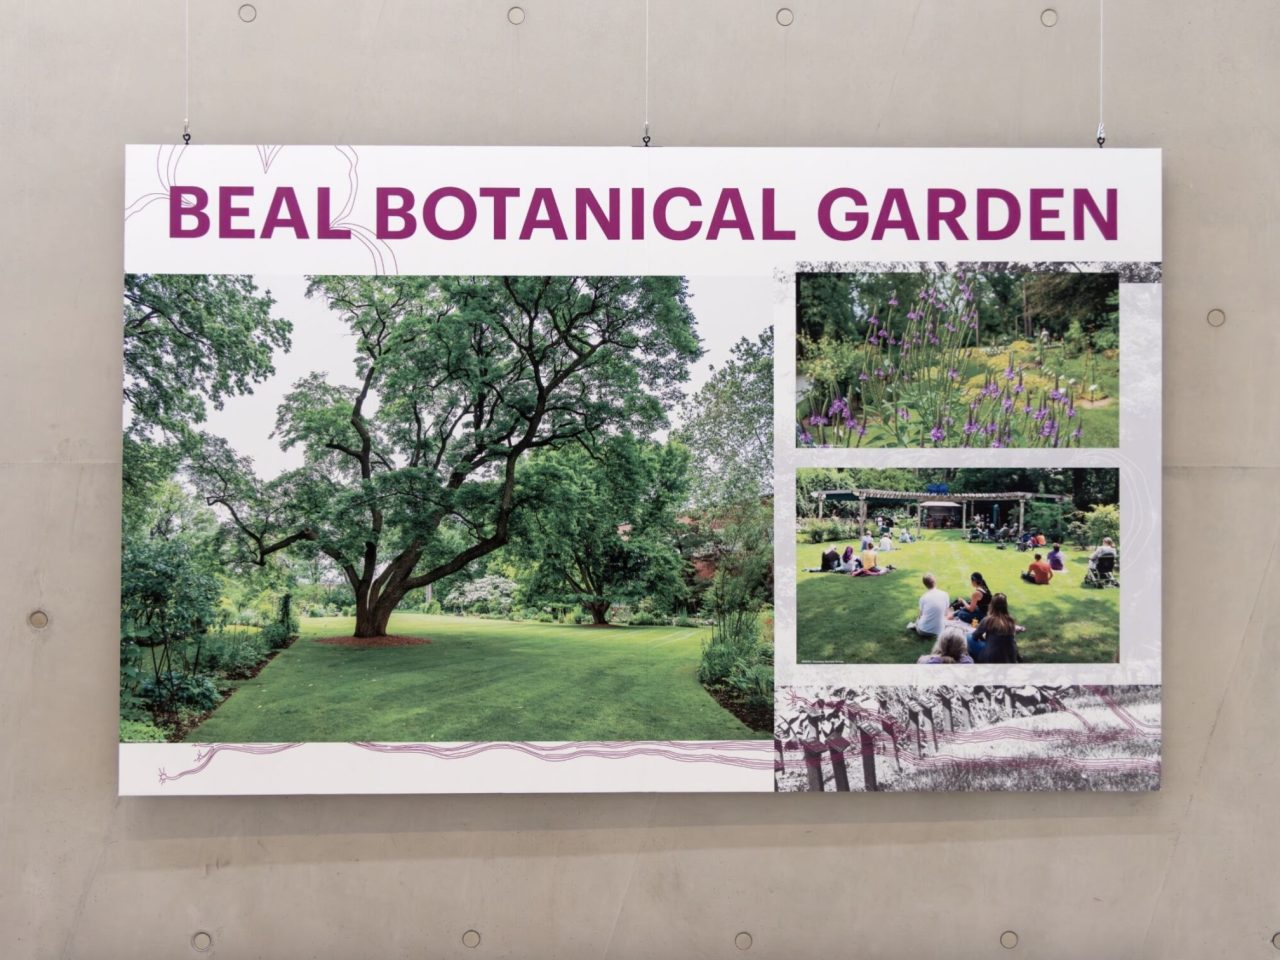 Beal Botanical Garden: Celebrating 150 years of people, plants, and place installation view